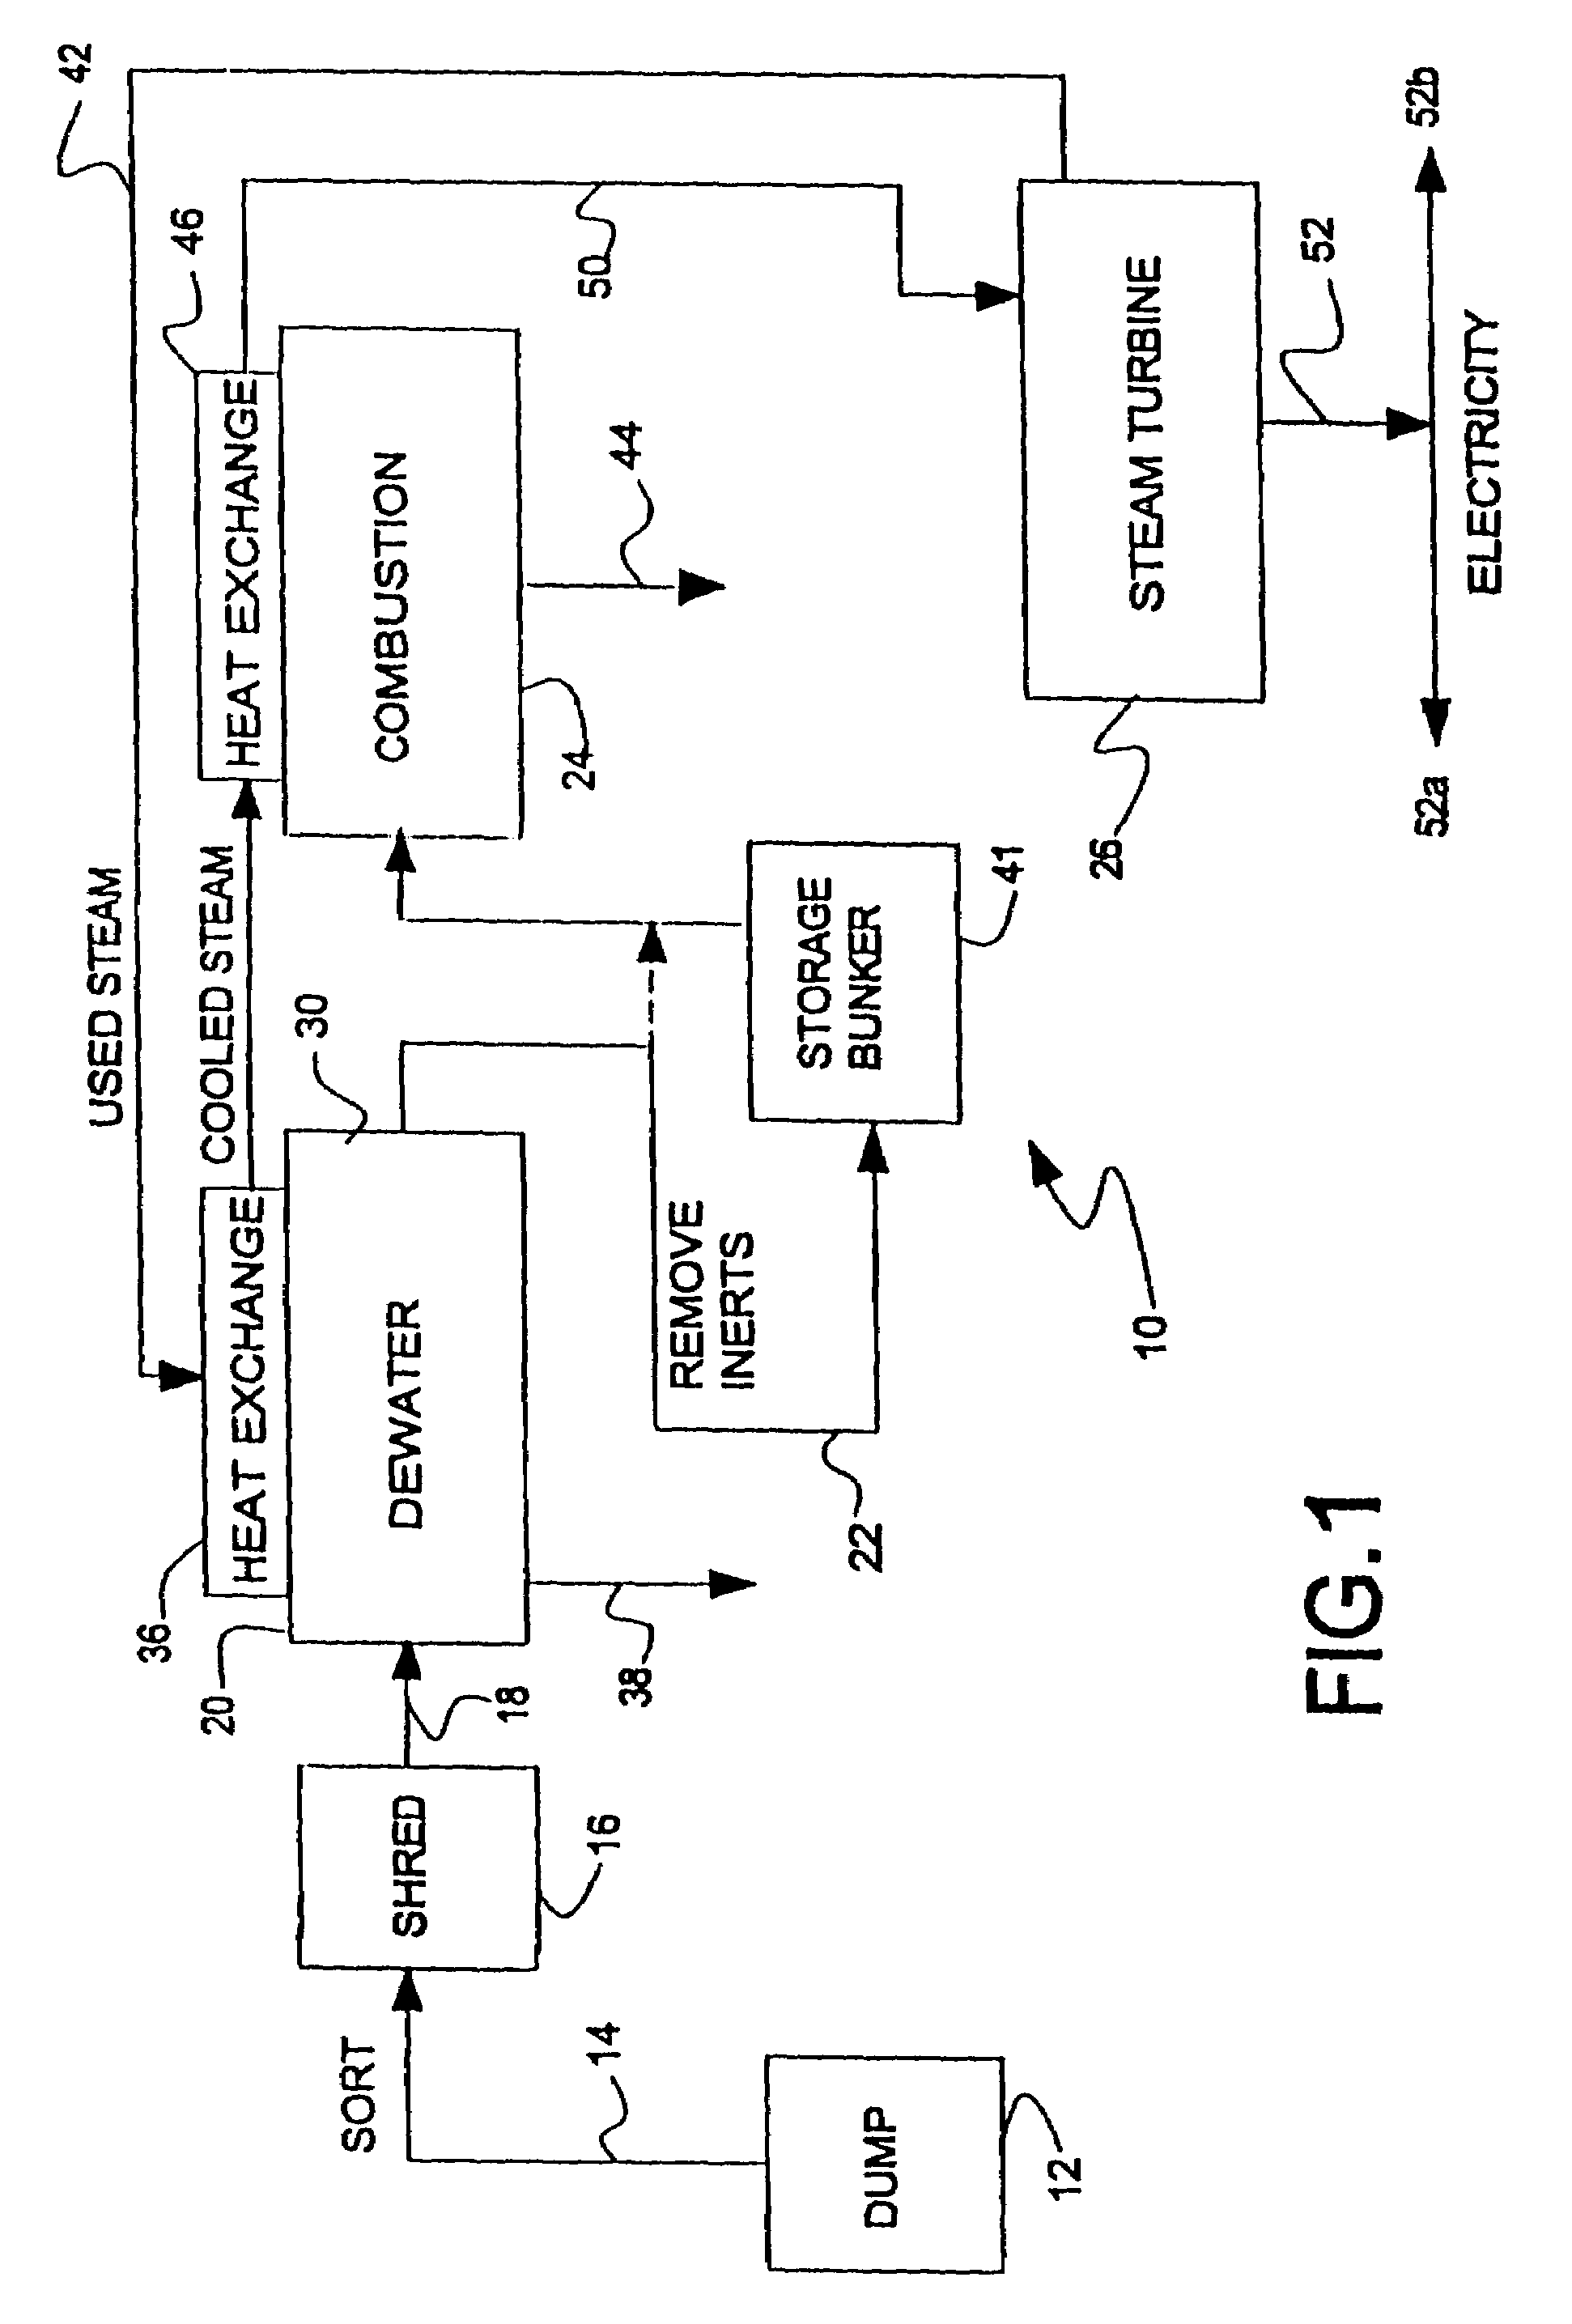 MSW disposal process and apparatus using gasification